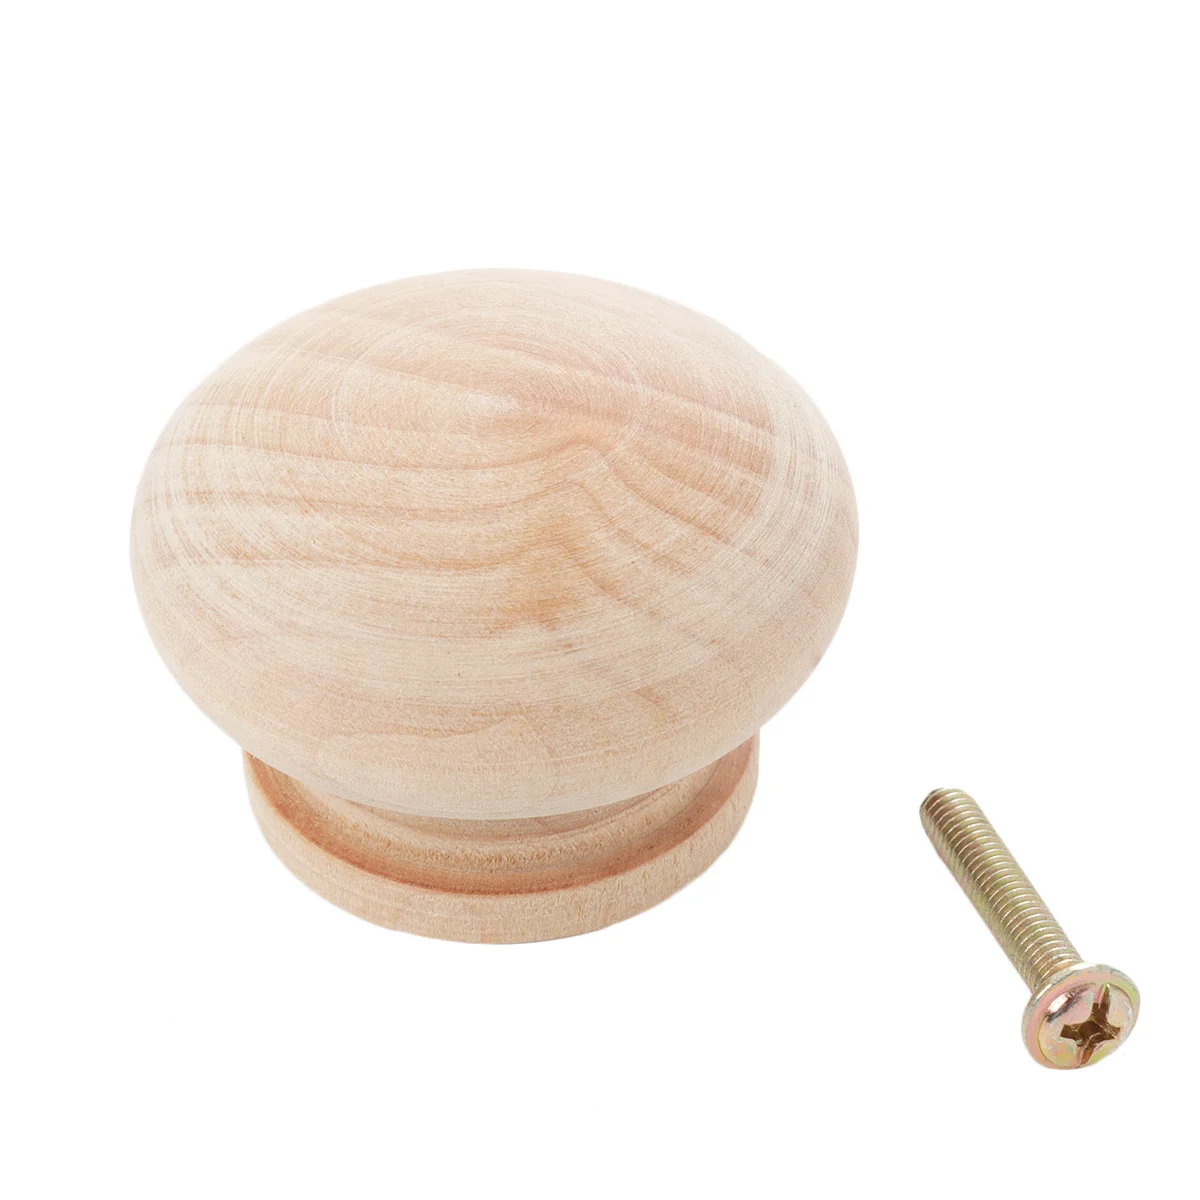 

15PCS Round Drawer Knob Wooden Cabinet Pull Knob Chic Wood Cabinet Handle Single Hole Beech Circular Pull Knobs Exquisite